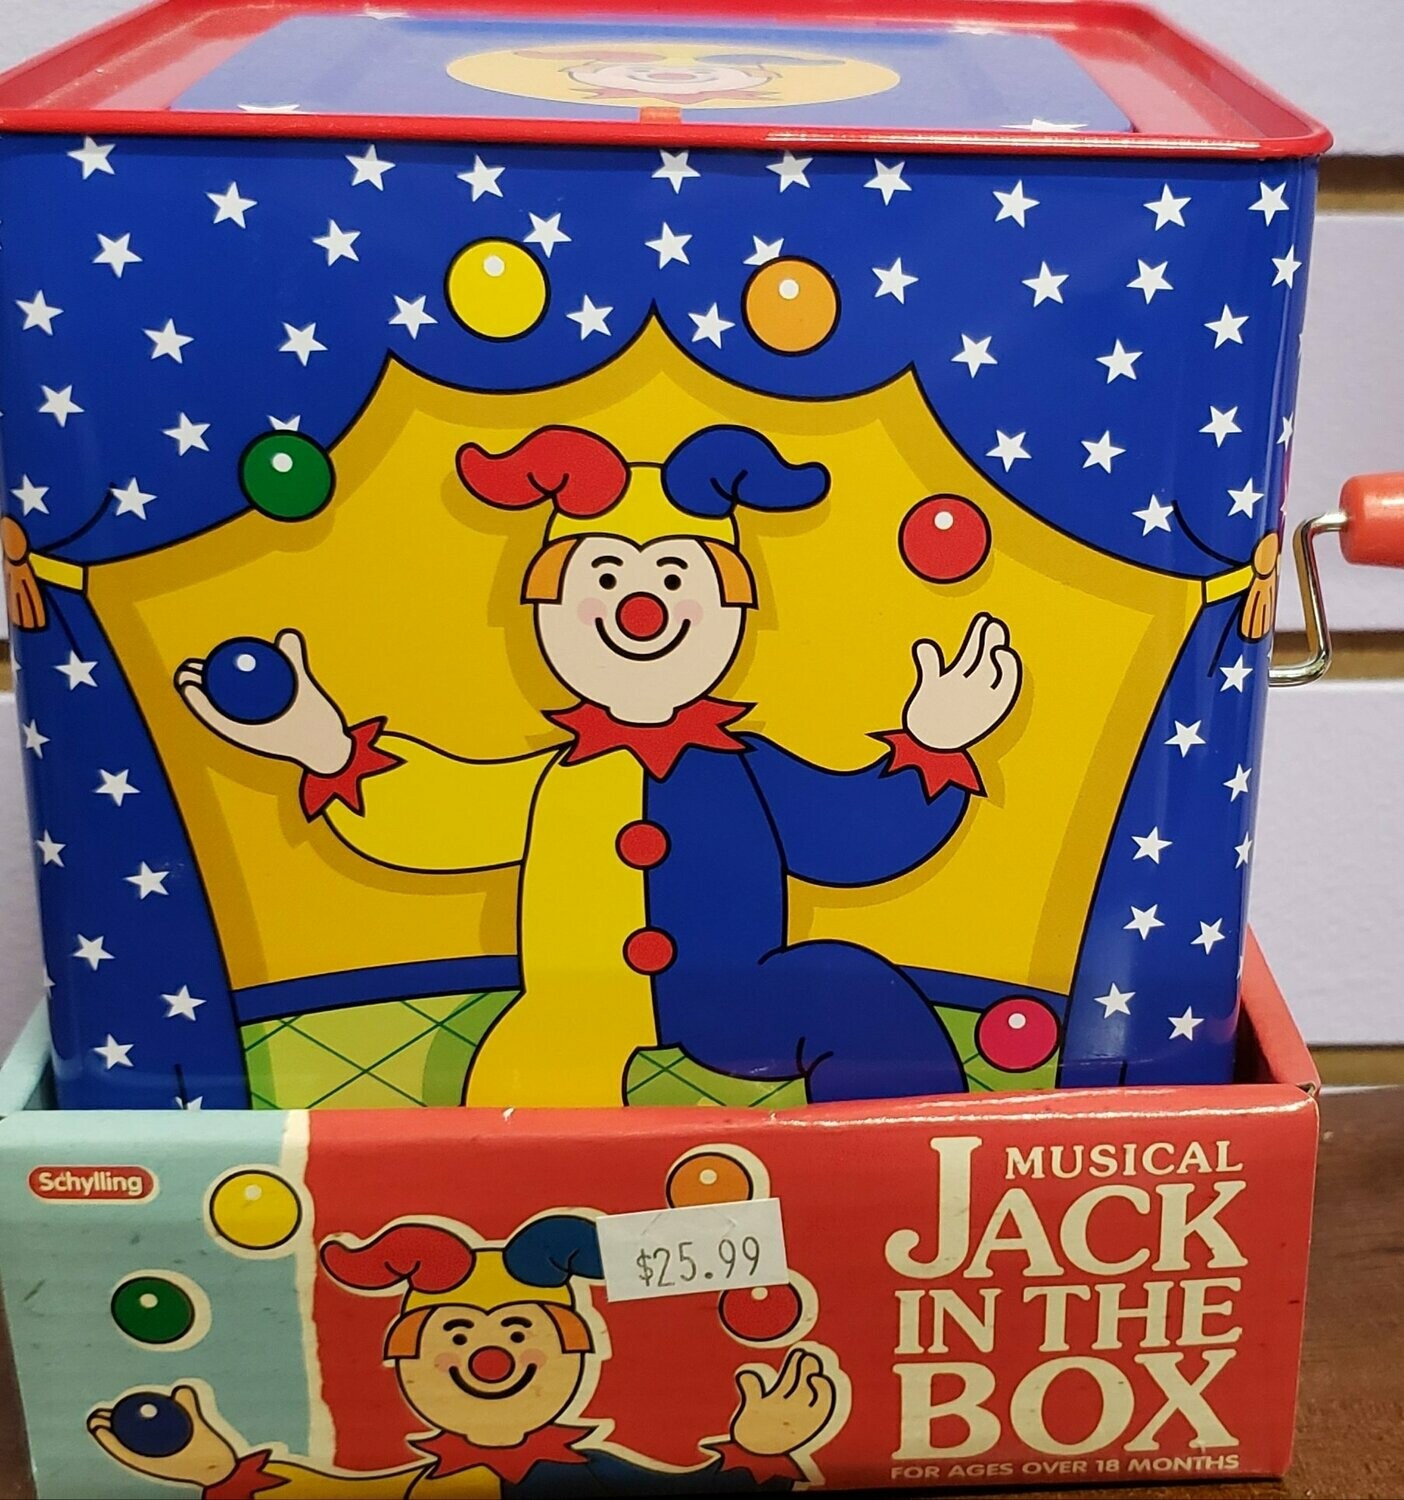 Schylling-Circus-Jack-In-The-Box-Musical-Children-Toy-Clown 